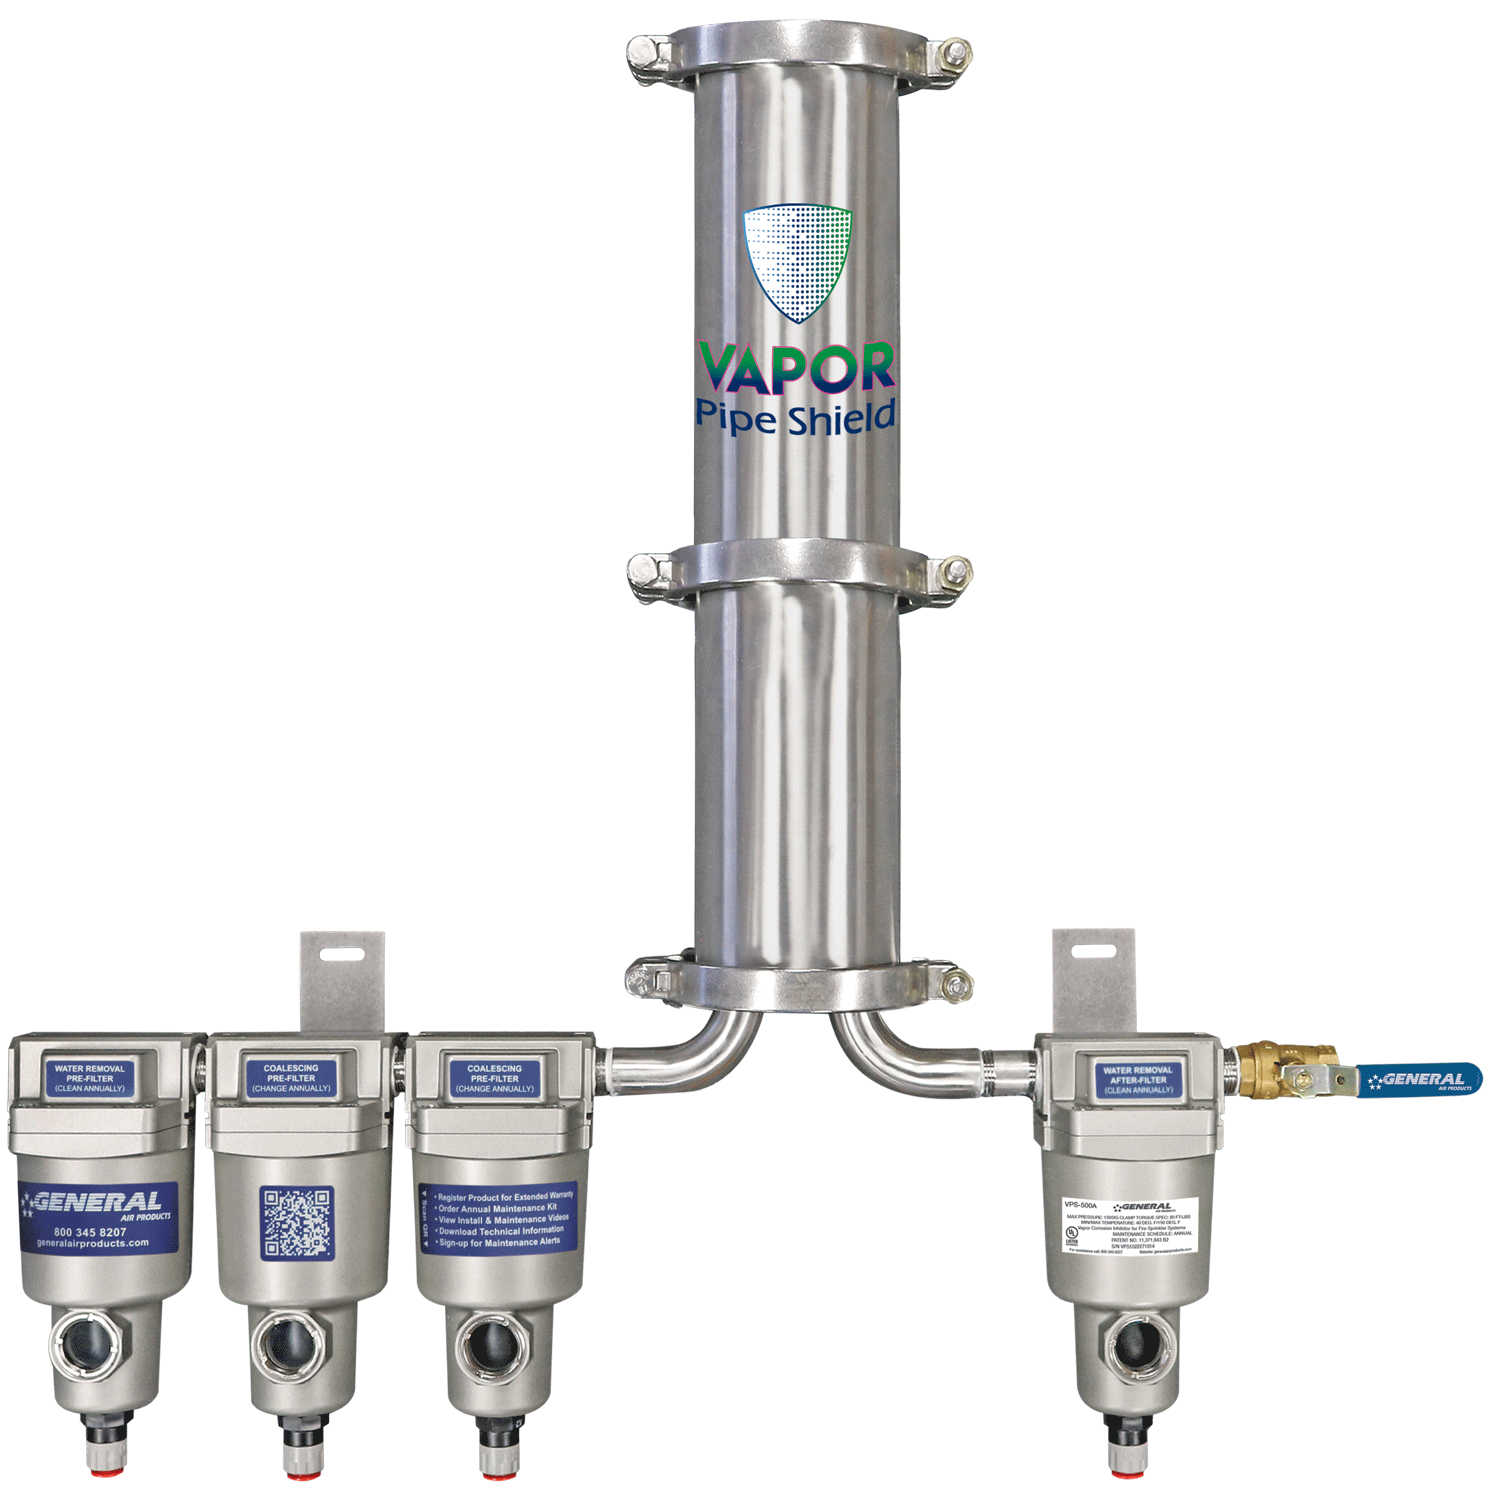 Vapor Pipe Shield - VPS-1000A. Corrosion prevention in dry and pre-action fire sprinkler systems.